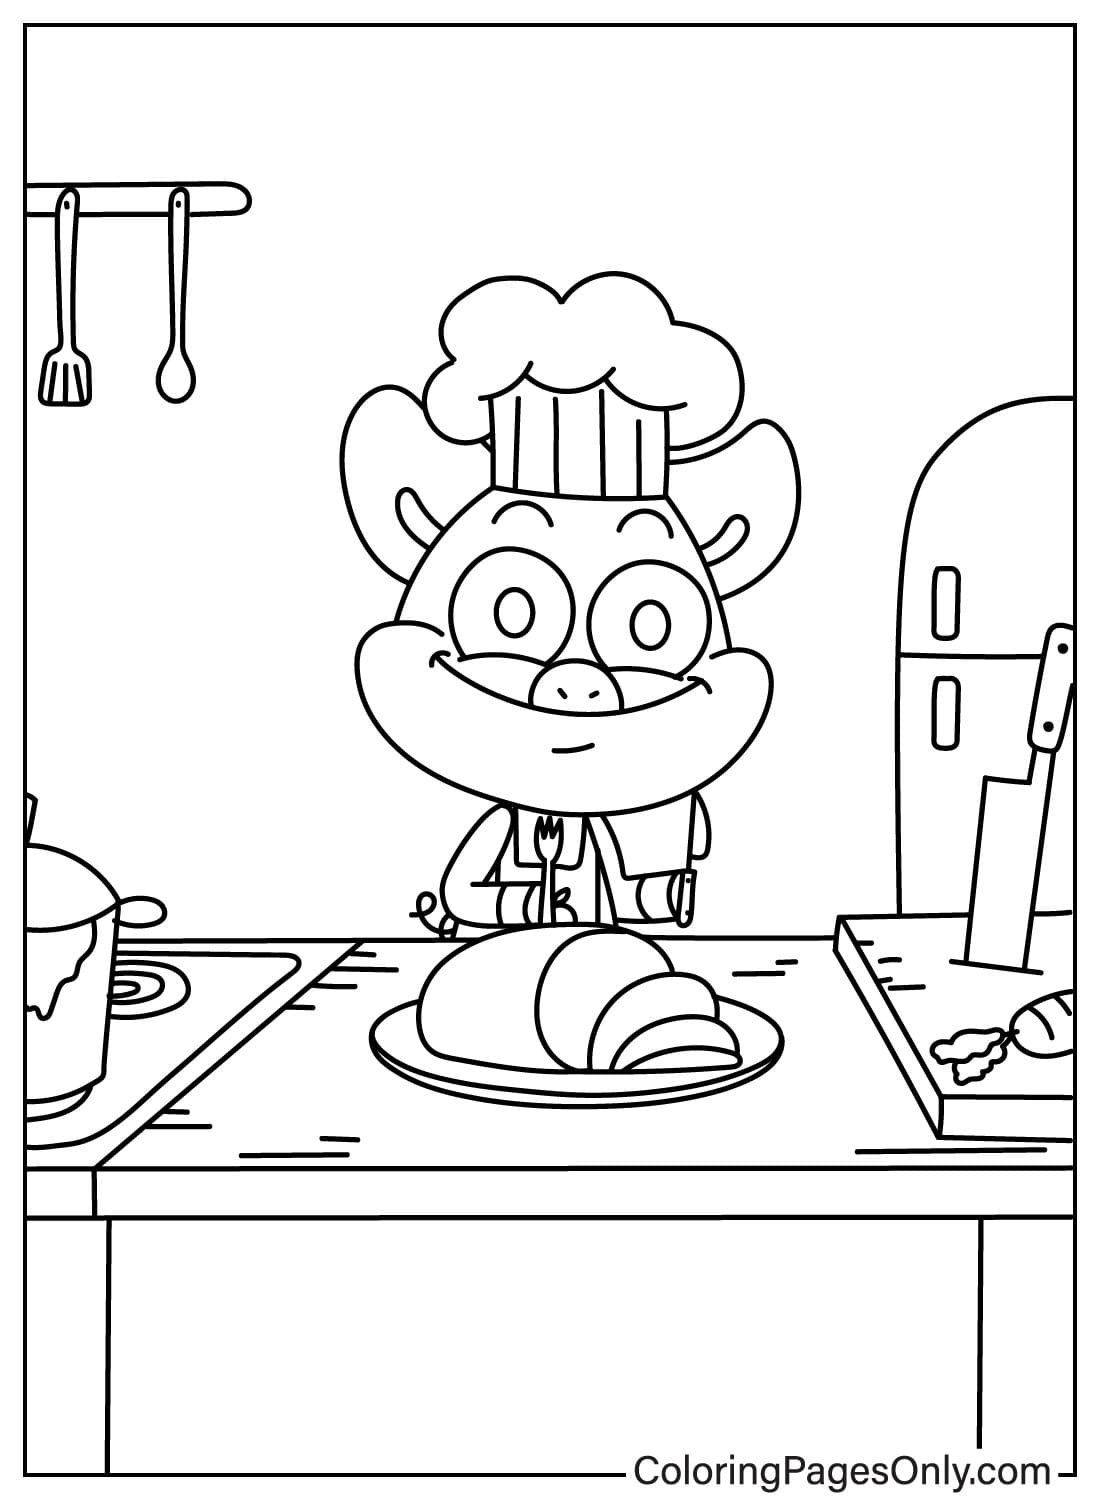 PickyPiggy Cook Coloring Page from PickyPiggy